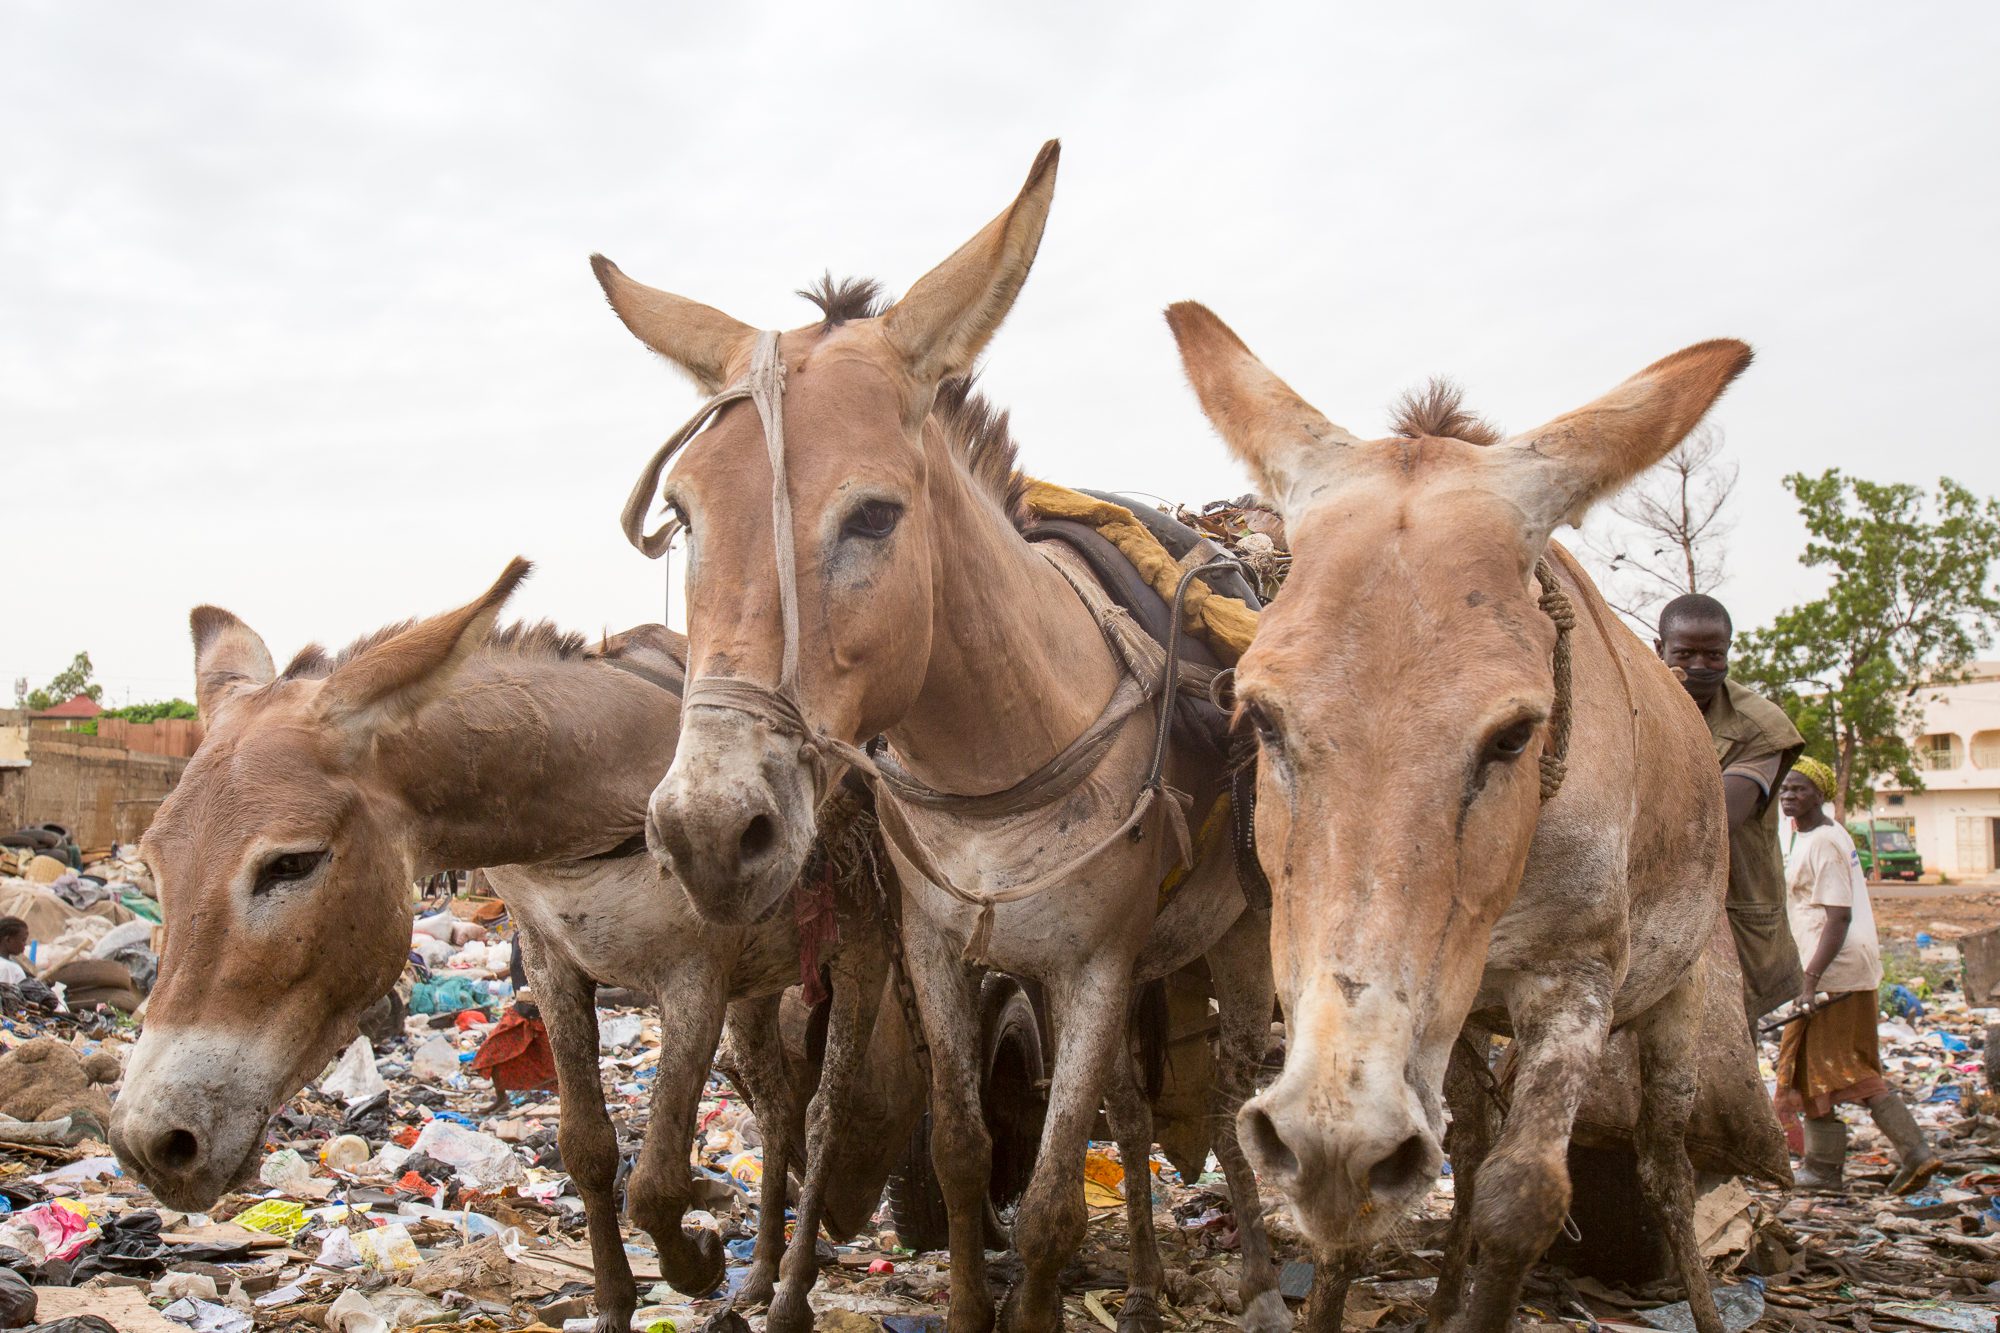 The Horrific Donkey Skin Trade: Plea to Social Media Giants to Clamp Down on Sale of Skins from Worked to Death and Stolen Animals